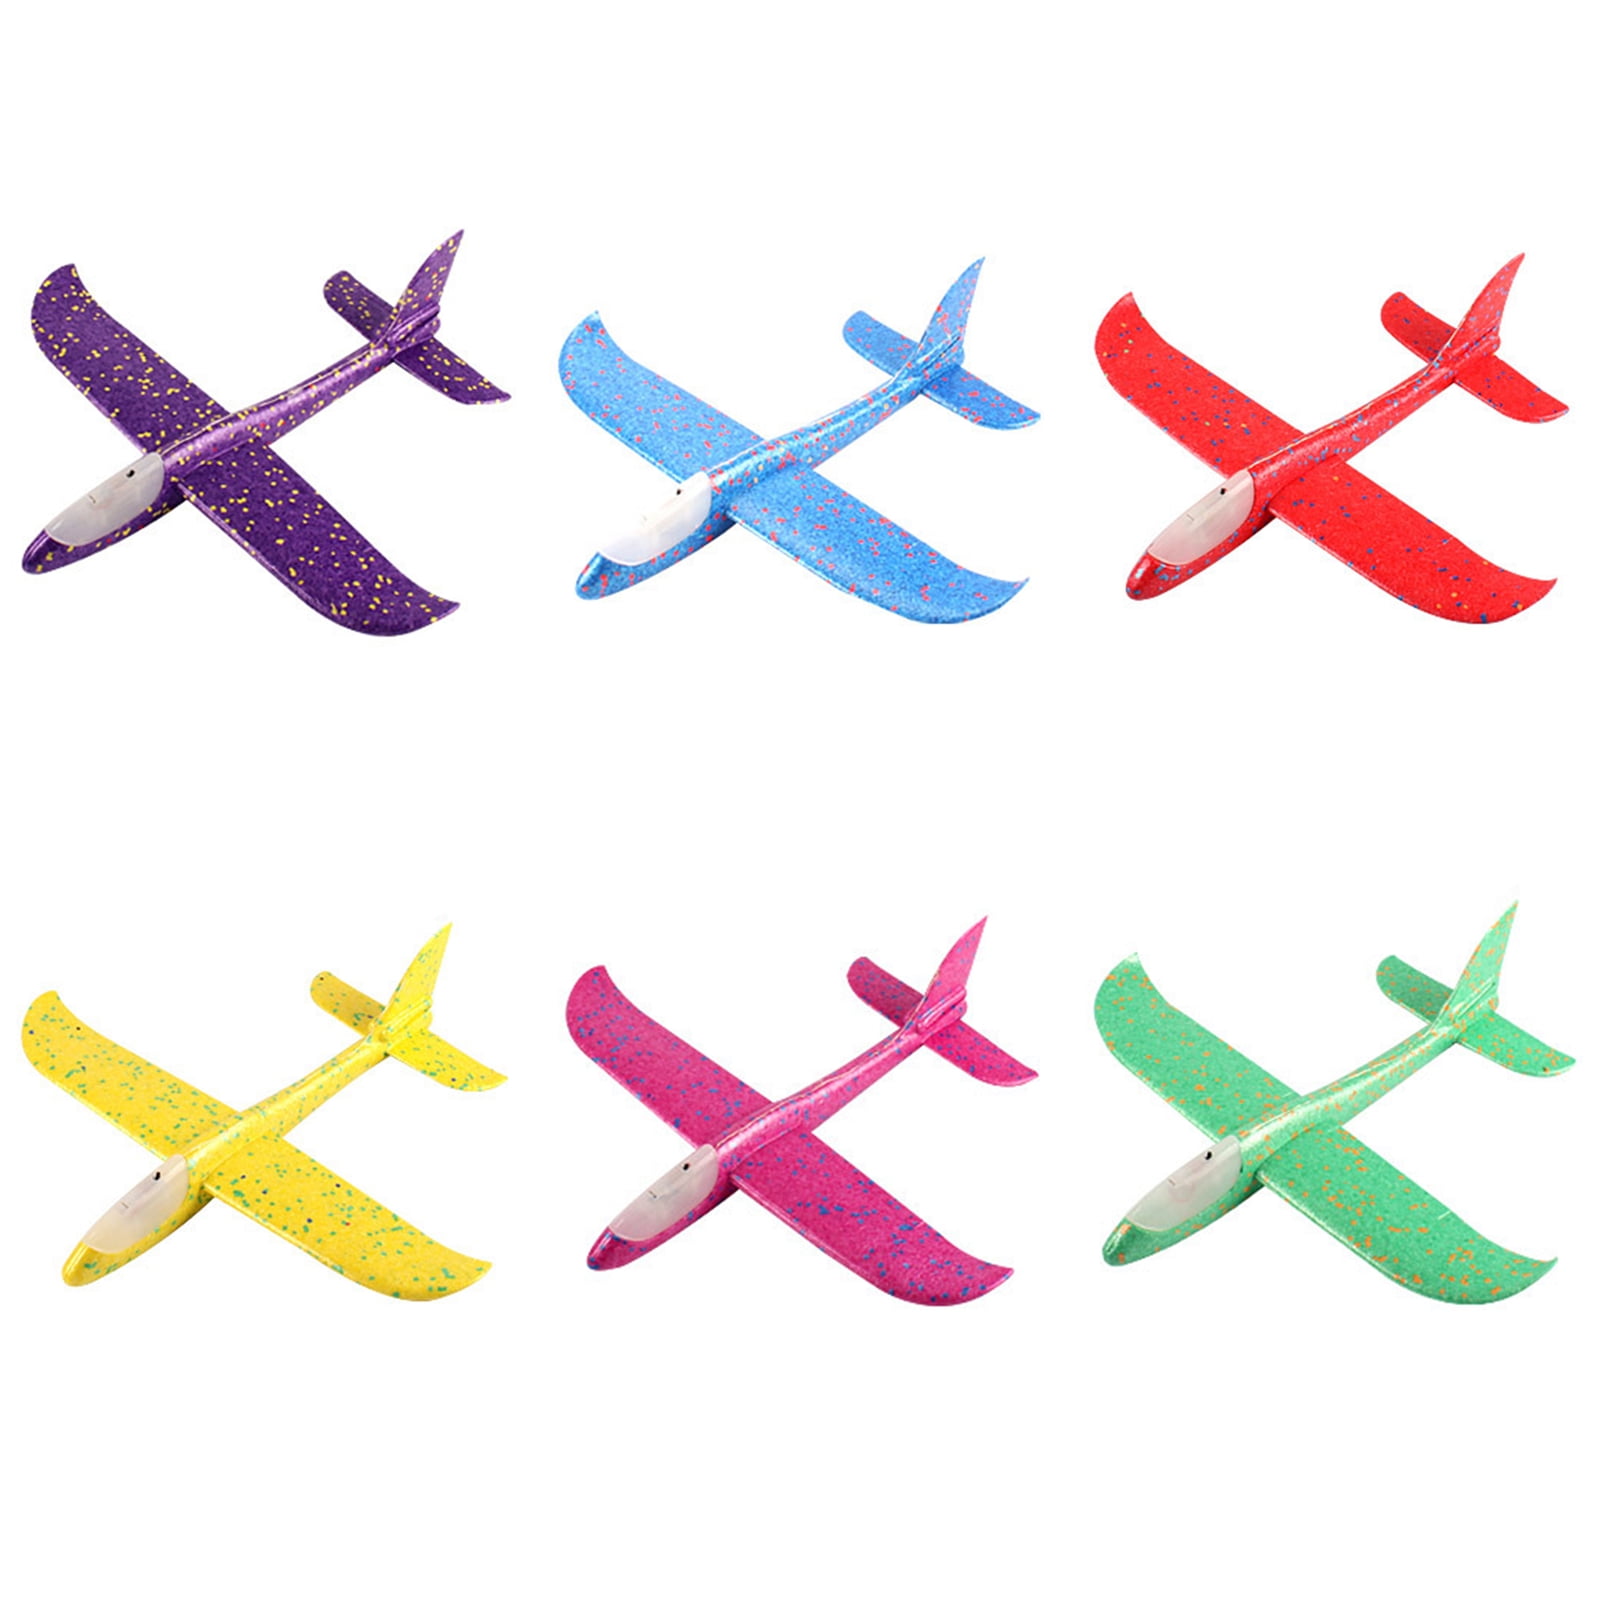 NOLITOY 30 Pcs Airplane Model Kids Outdoor Toys Elastic Powered Glider  Plane Boys Party Favors Glider Model Plane Foam Airplanes for Kids Plane  Models